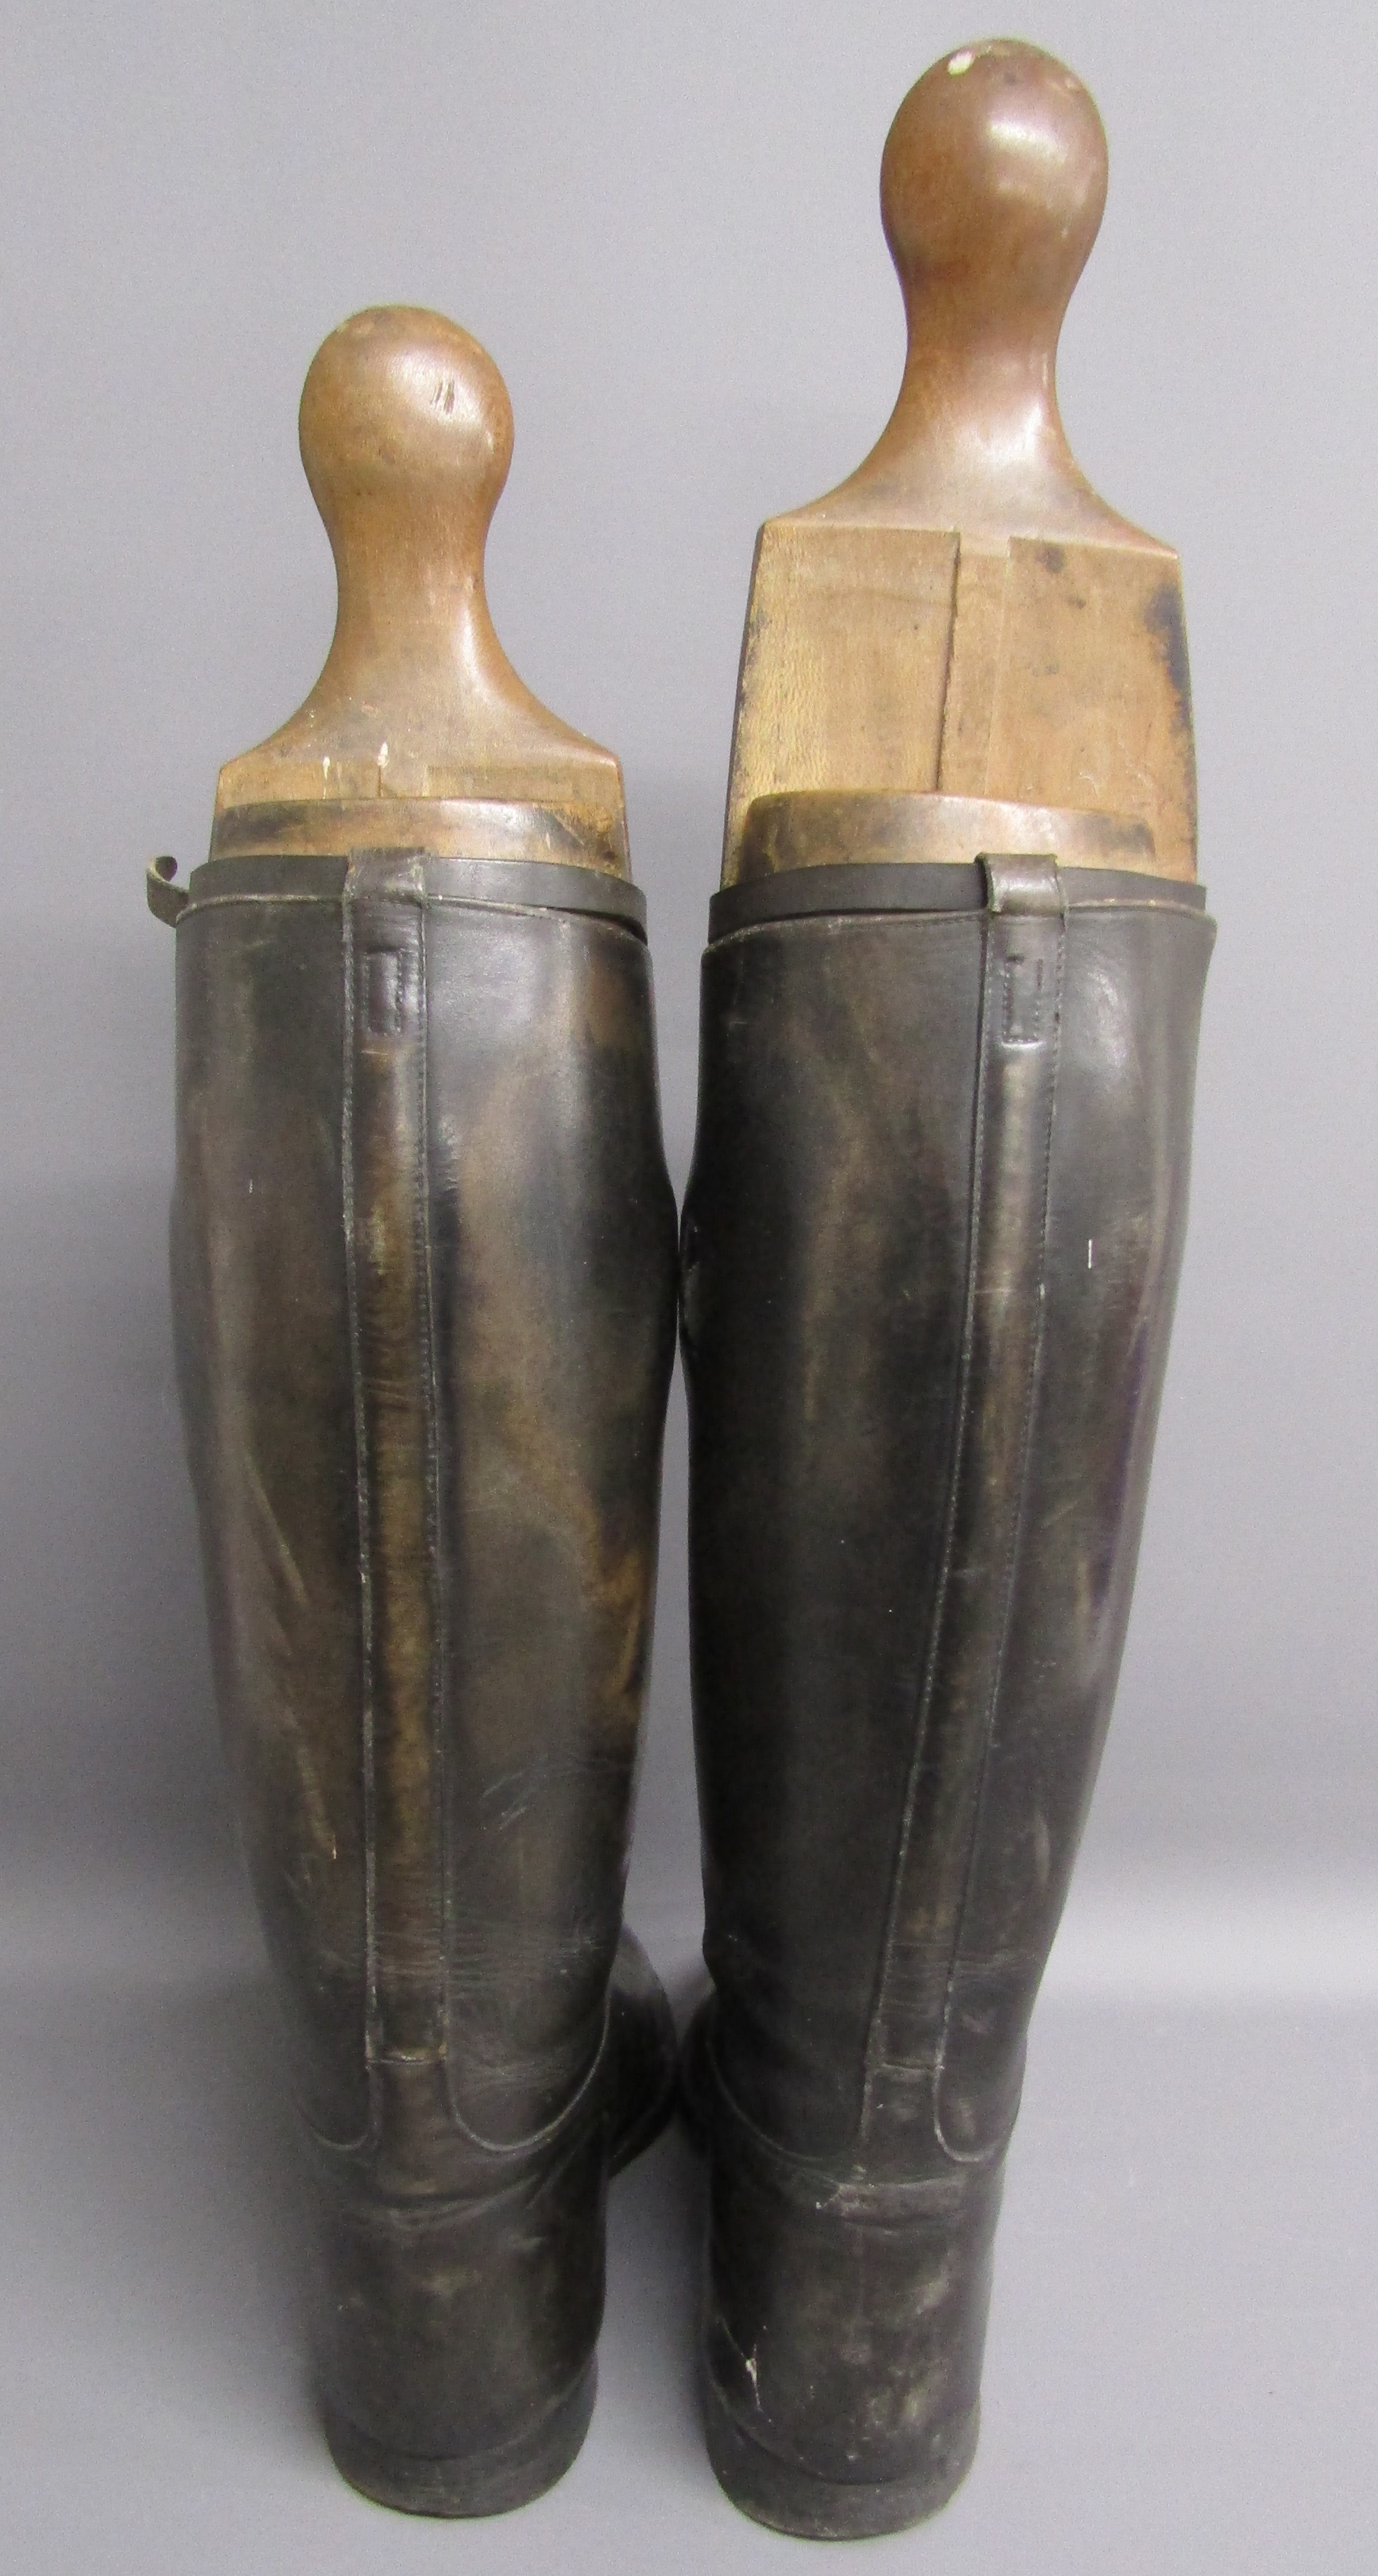 Leather riding boots with wooden boot trees - Image 4 of 7